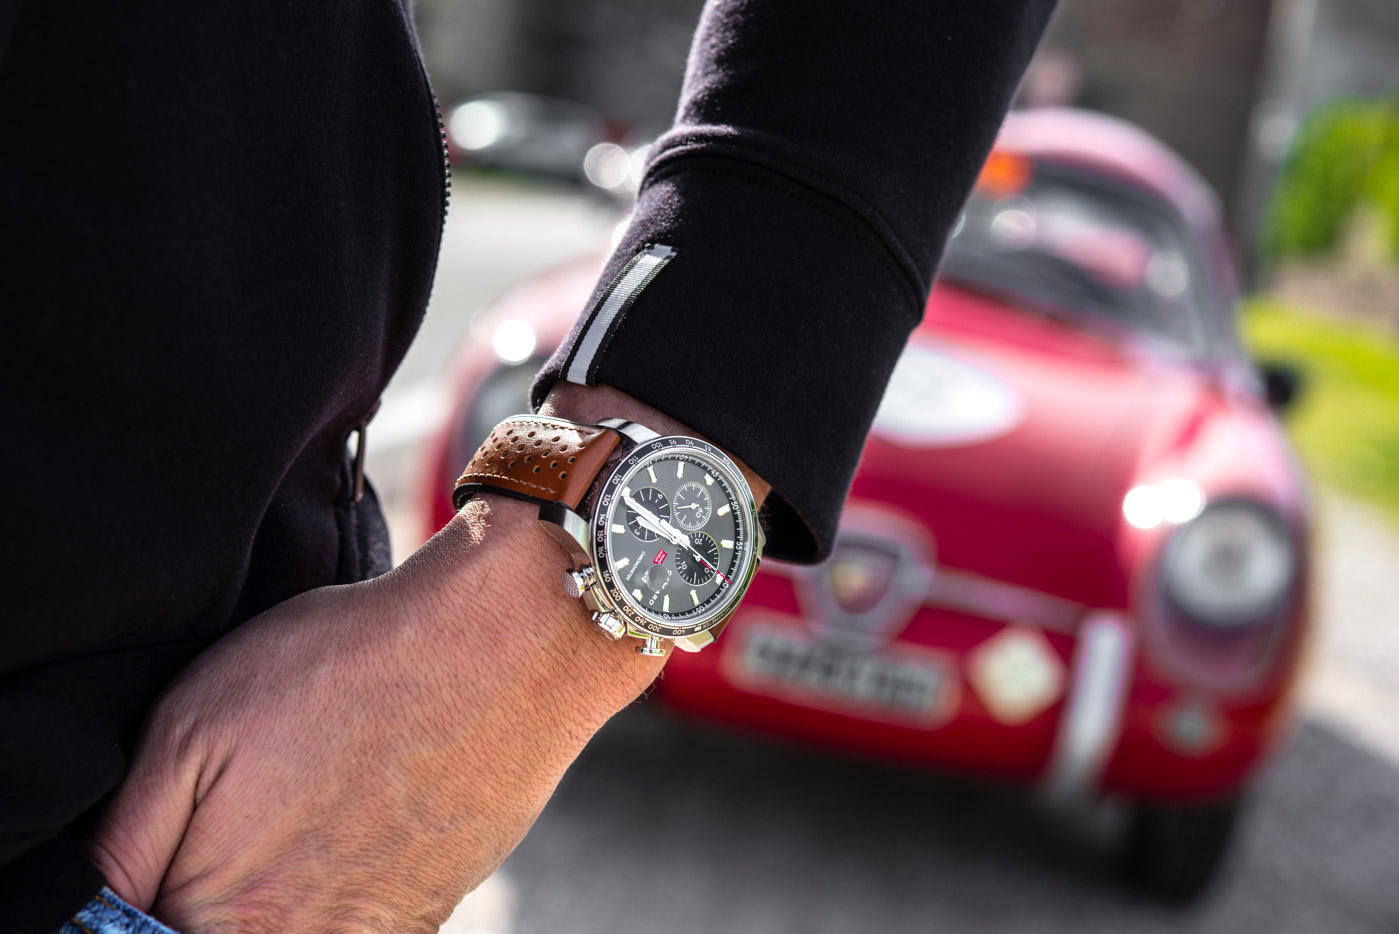 The Chopard Mille Miglia Is Indeed A True Car Lovers' Watch